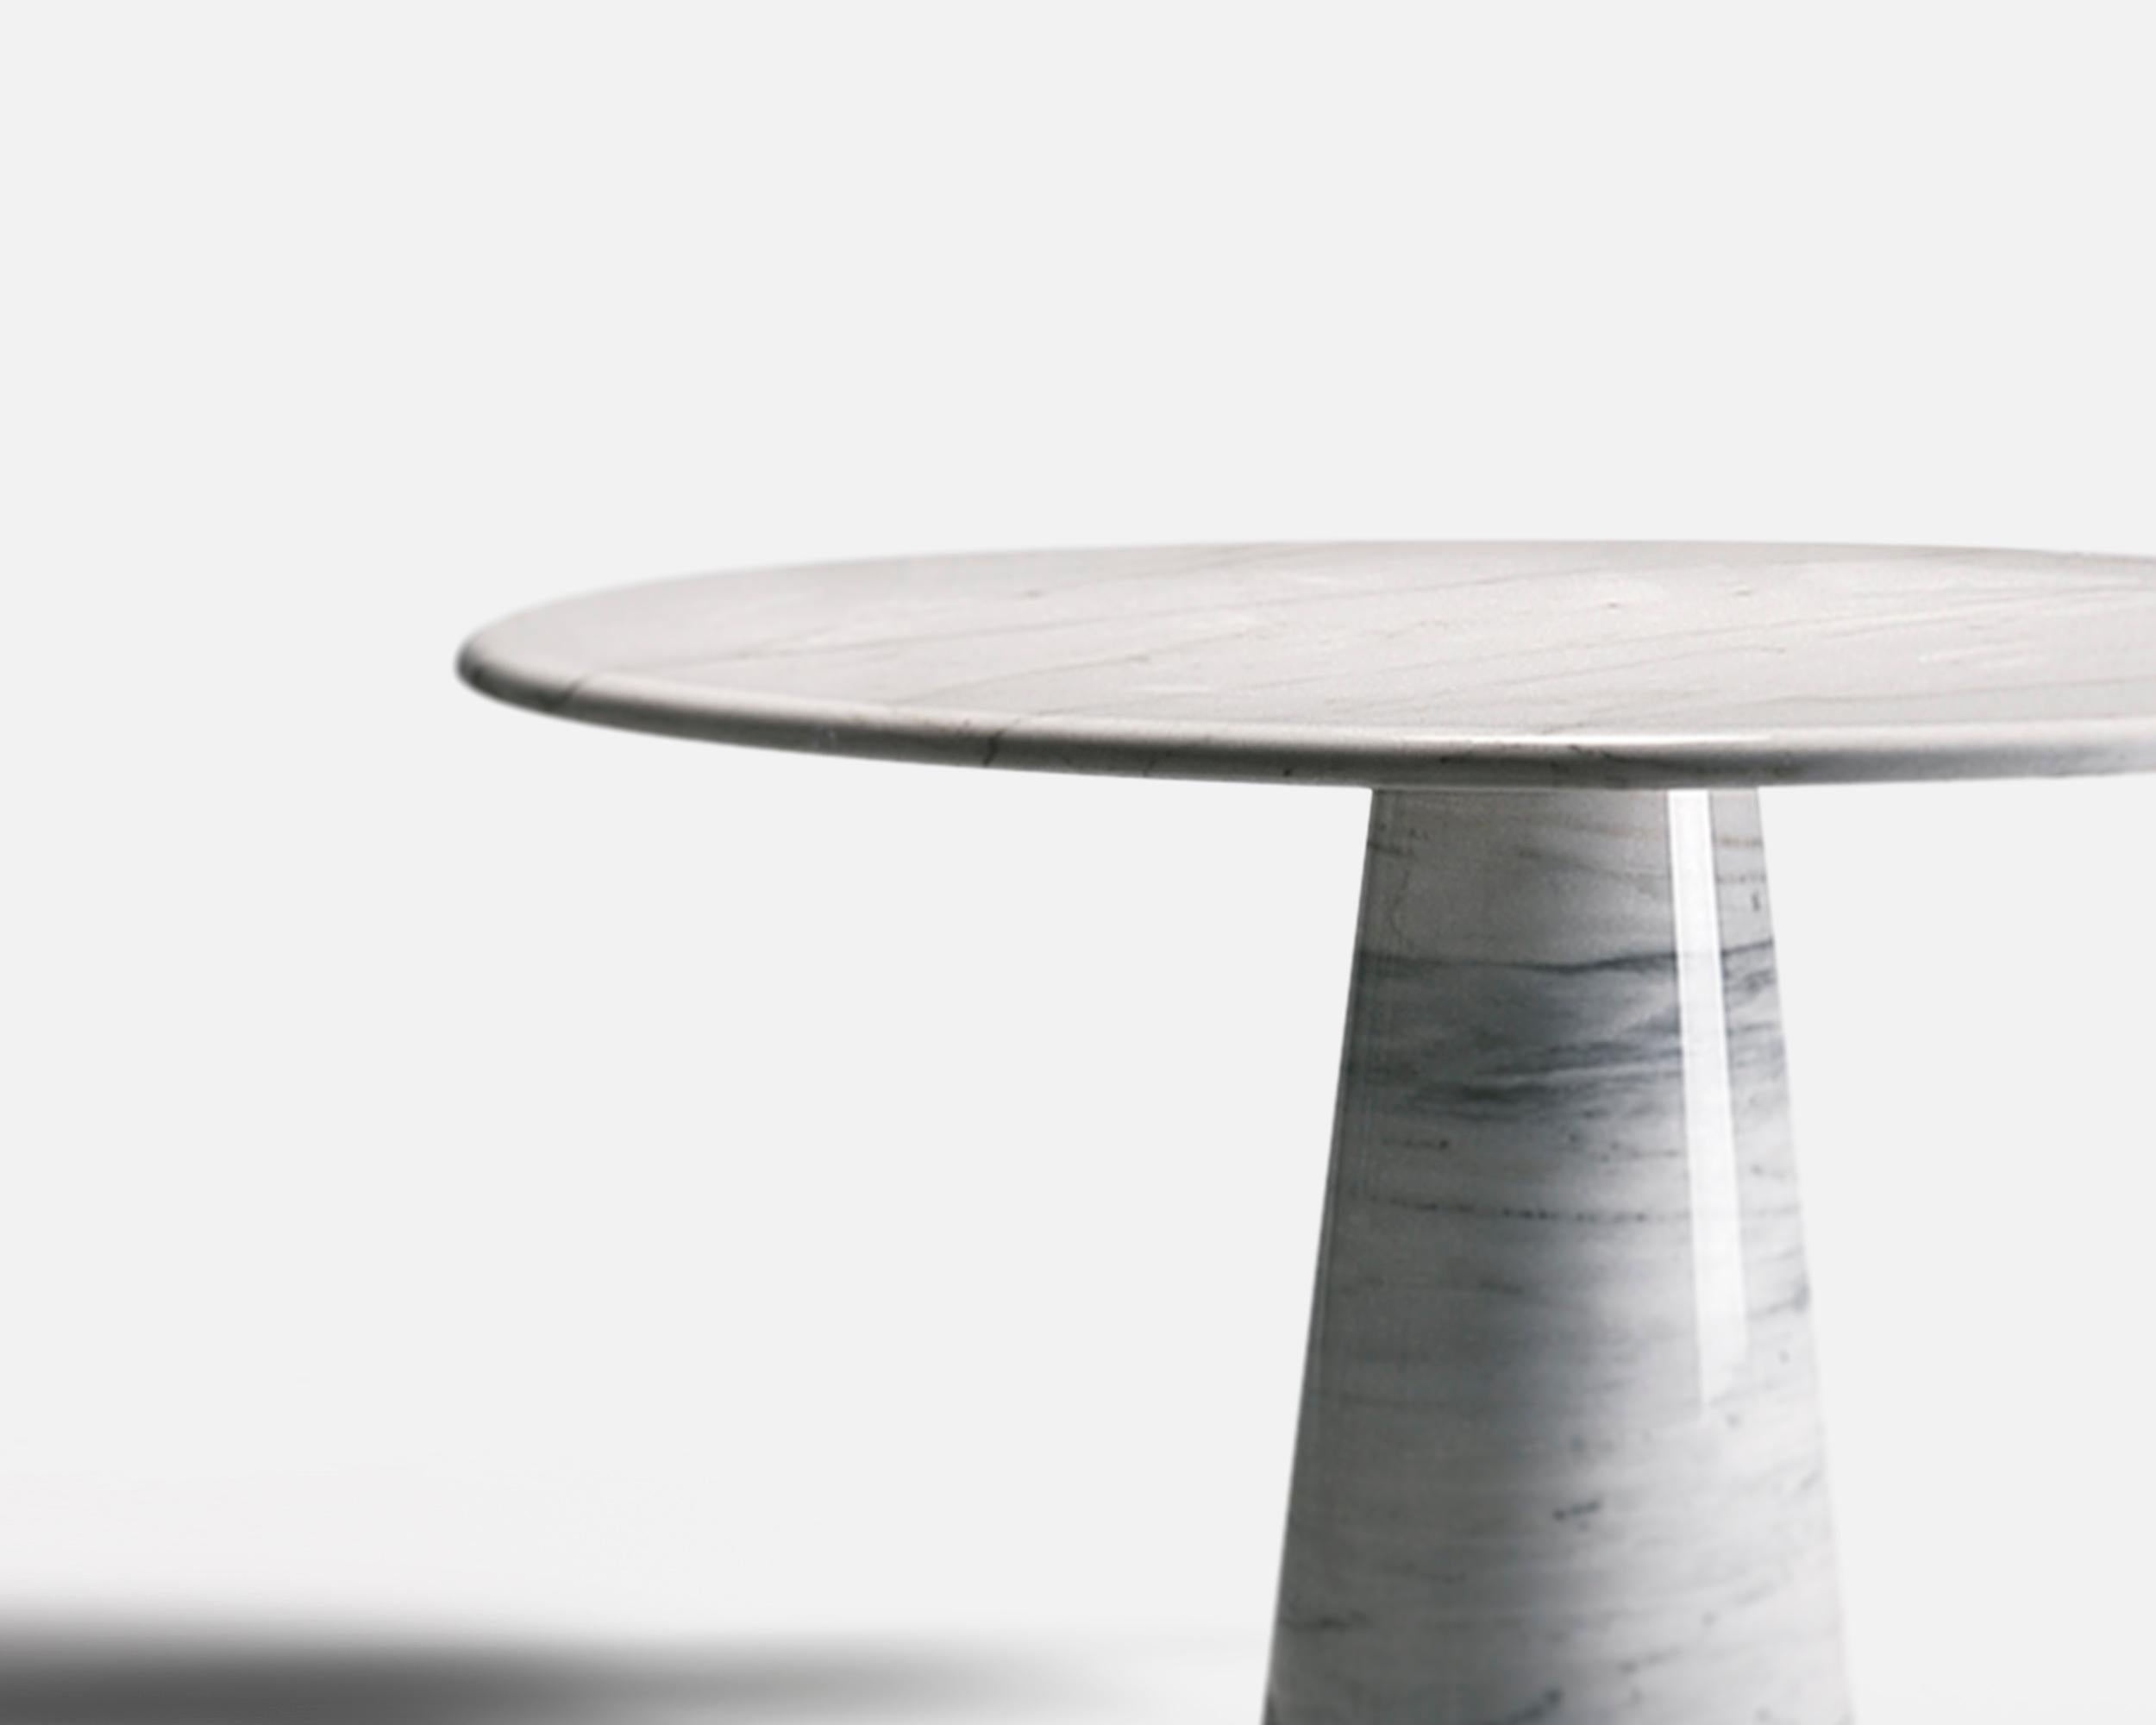 'Colonnata' round dining table in marble or travertine
Design by Pier Alessandro Giusti & Egidio Di Rosa.
1970s

Dimensions: H. 72cm, D. 130cm
Material: Carrara Marble (more marbles or stones are available)

Customization: 
This table is still